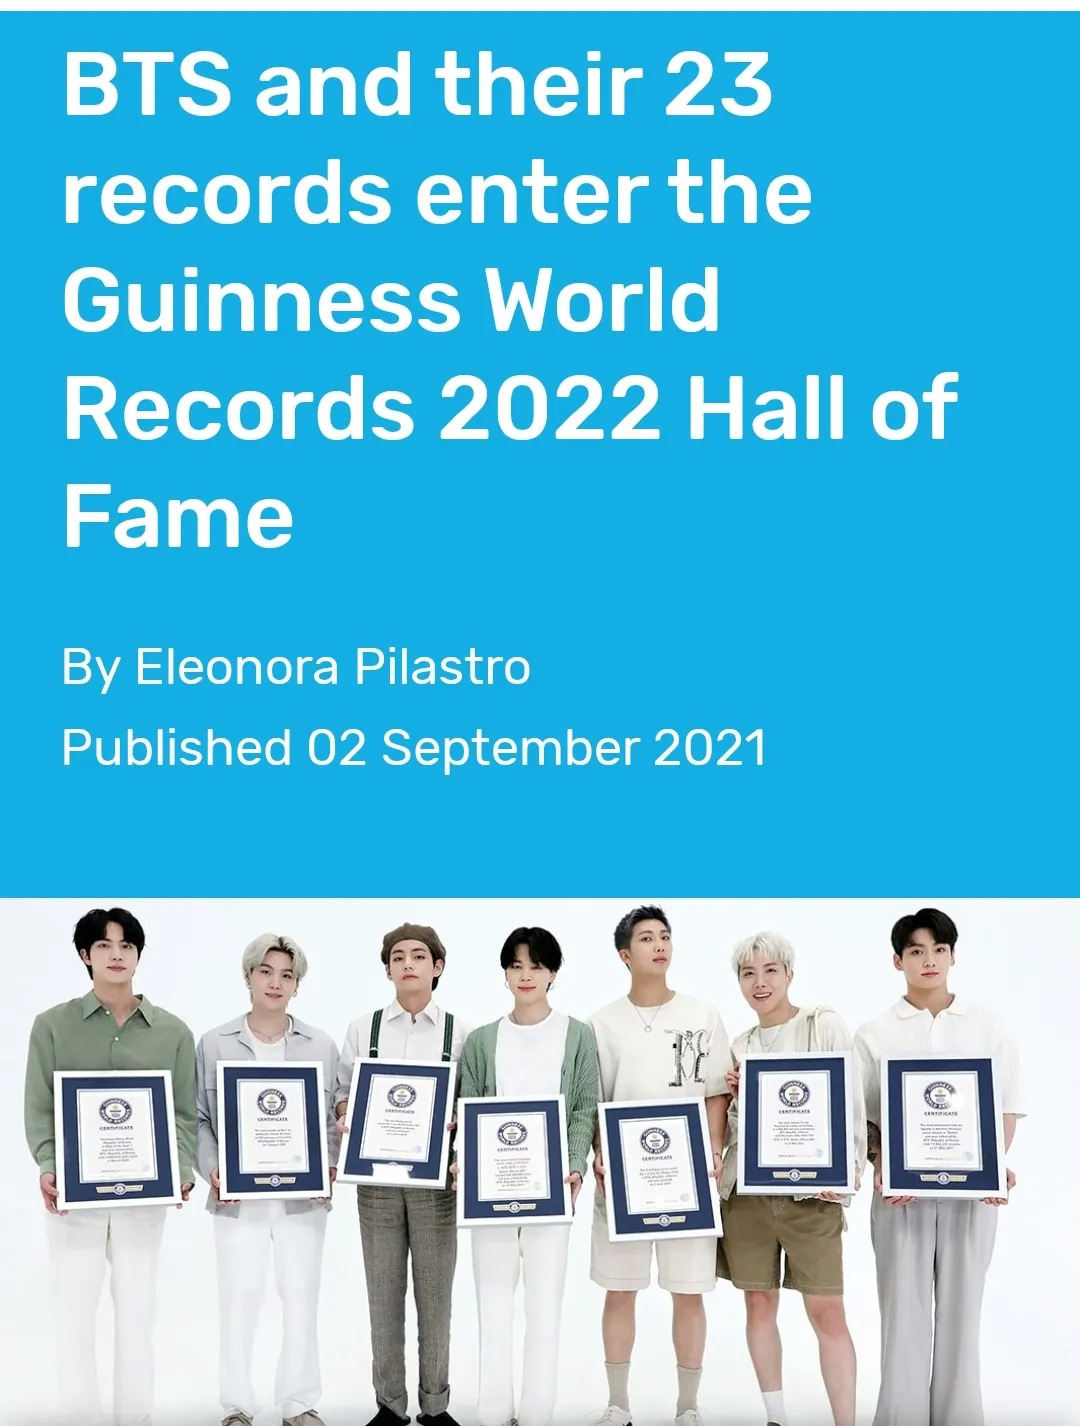 BTS and their 23 records enter the Guinness World Records 2022